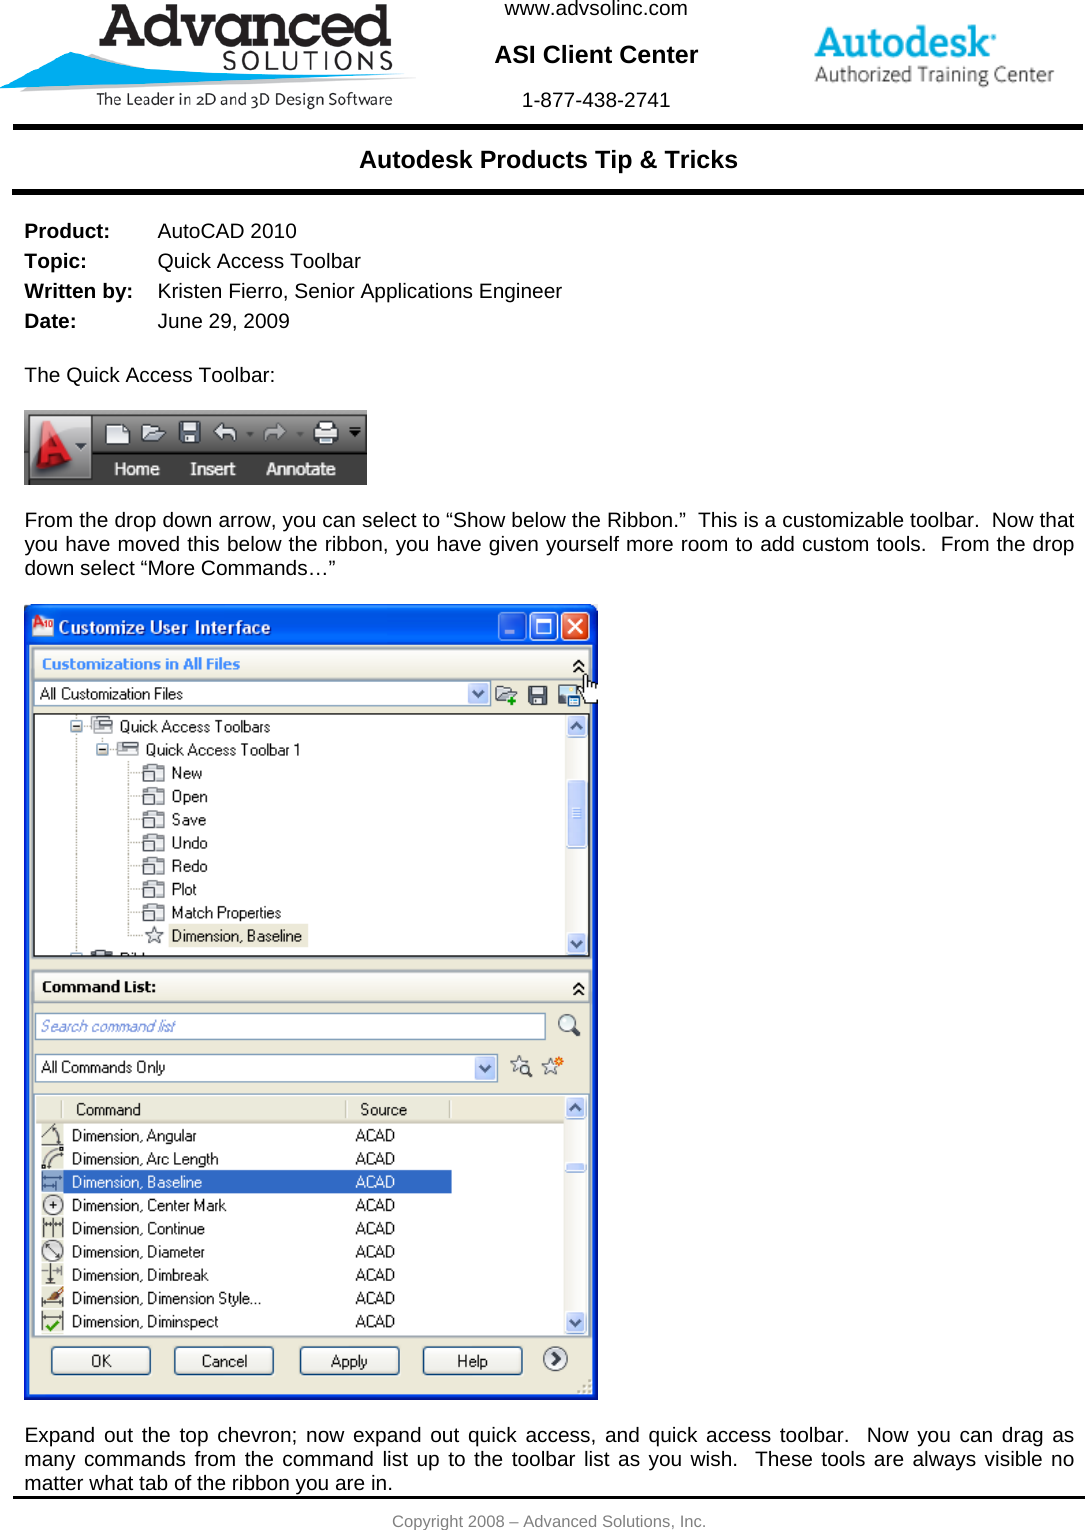 Page 1 of 1 - Quick Access Toolbar  062909